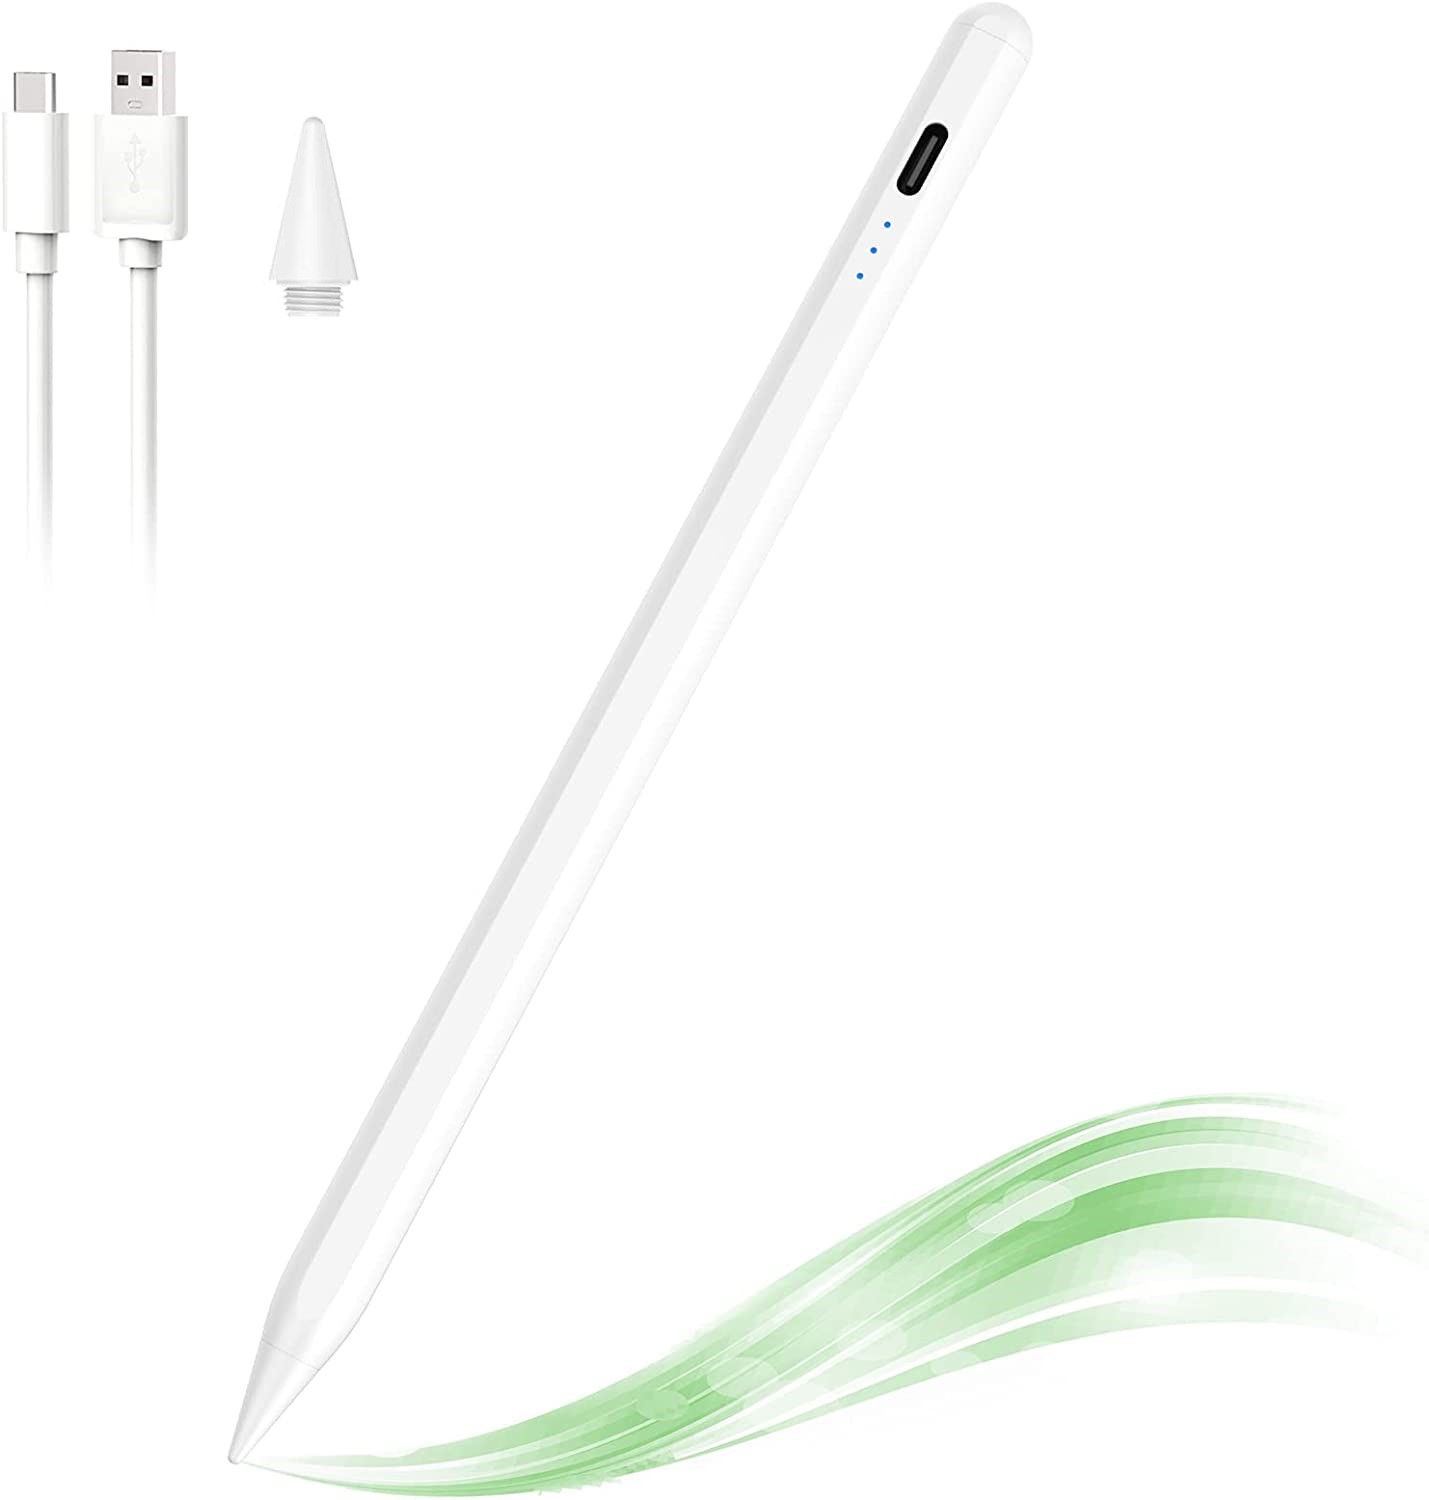 China Cheap price Fancy Stylus Pens For Touch Screens - Stylus Pen for iPad with Palm Rejection, Tilt Sensitive and Magnetic Design, Digital Pencil Compatible with 2018 and Later Model(iPad Pro 20...